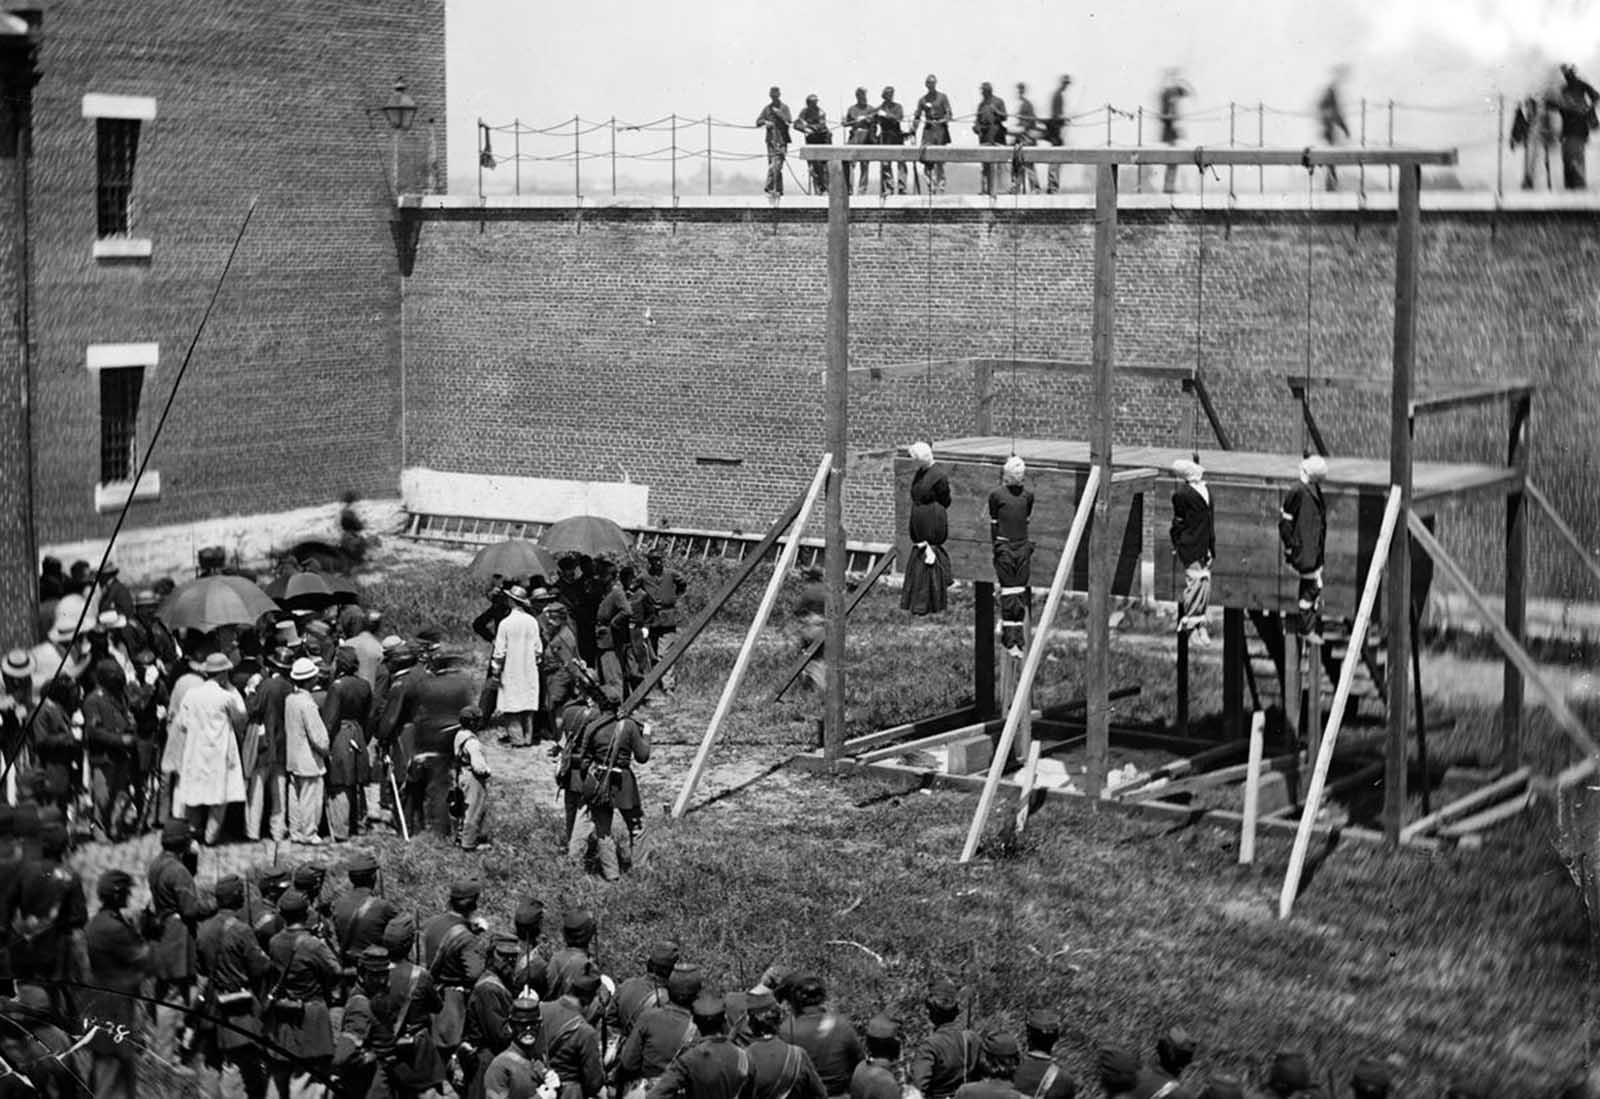 The hanging hooded bodies of the four conspirators, Mary Surratt, Lewis Powell (Payne), David Herold, and George Atzerodt, executed on July 7, 1865 at Fort McNair in Washington, District of Columbia, All four had been convicted of taking part in the conspiracy to assassinate Abraham Lincoln.